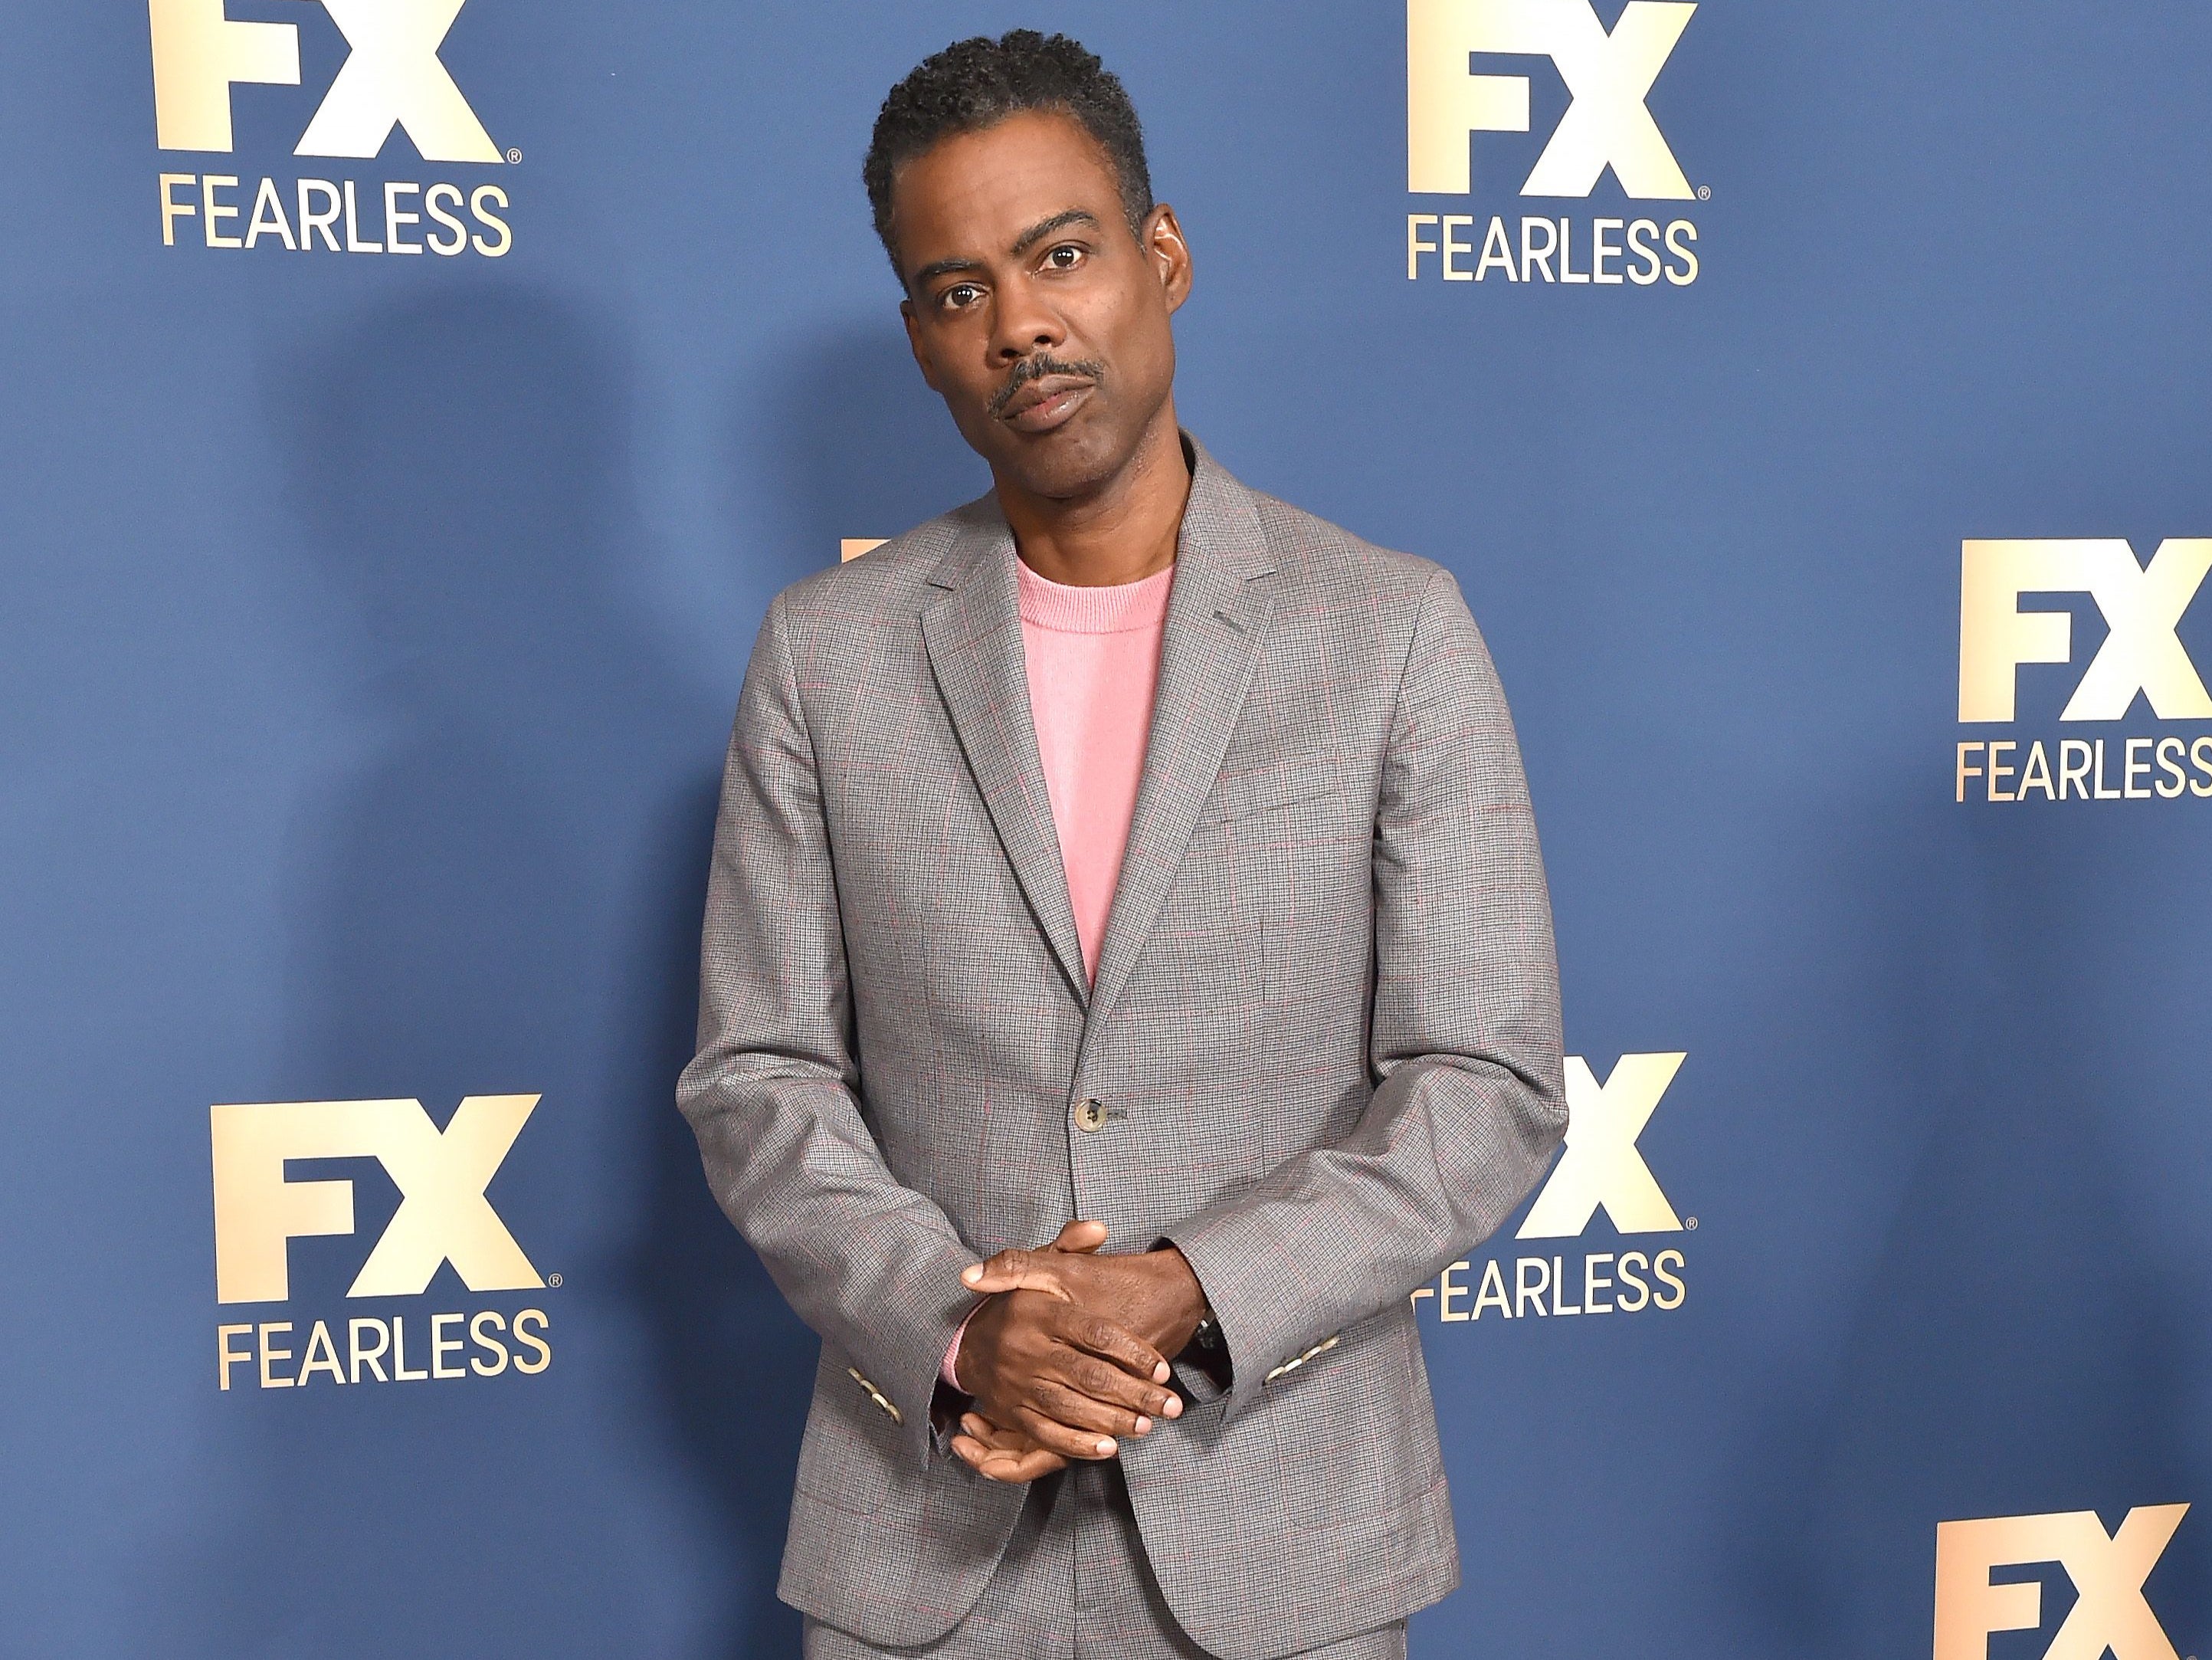 Chris Rock reveals he increased therapy sessions amid pandemic